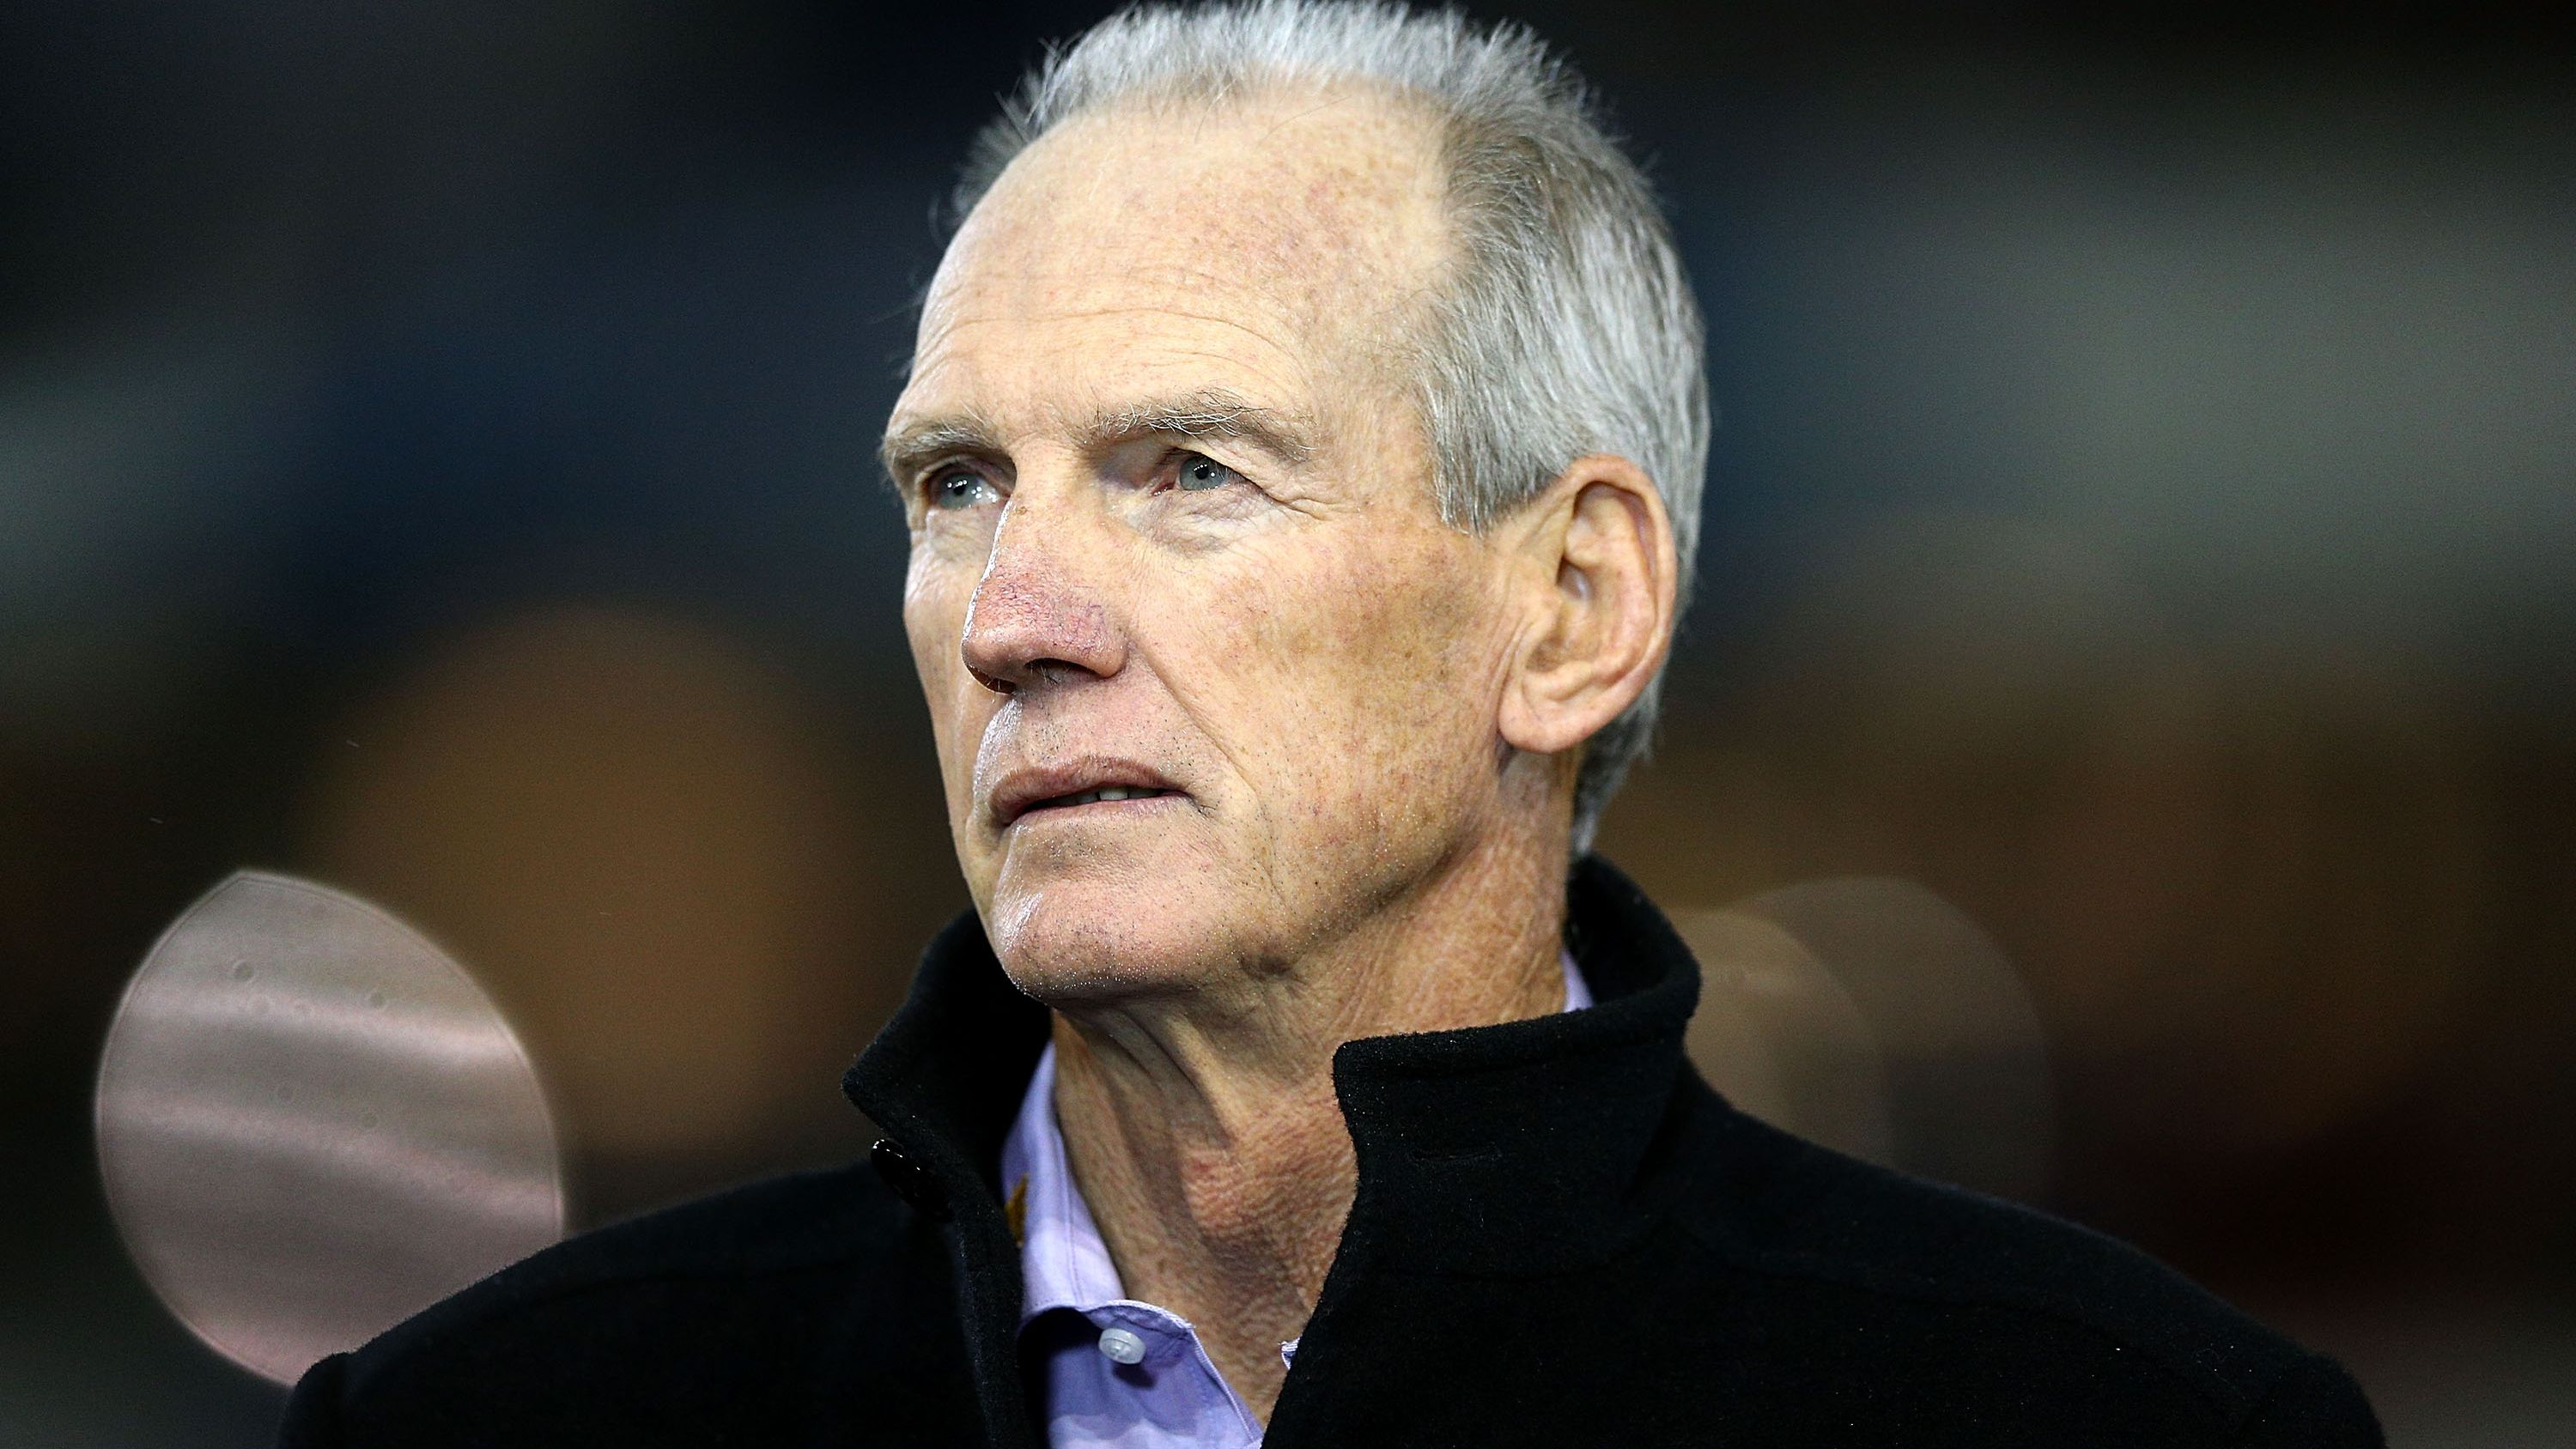 EXCLUSIVE: Worrying Wayne Bennett history that could come back to bite Rabbitohs, writes Paul Gallen